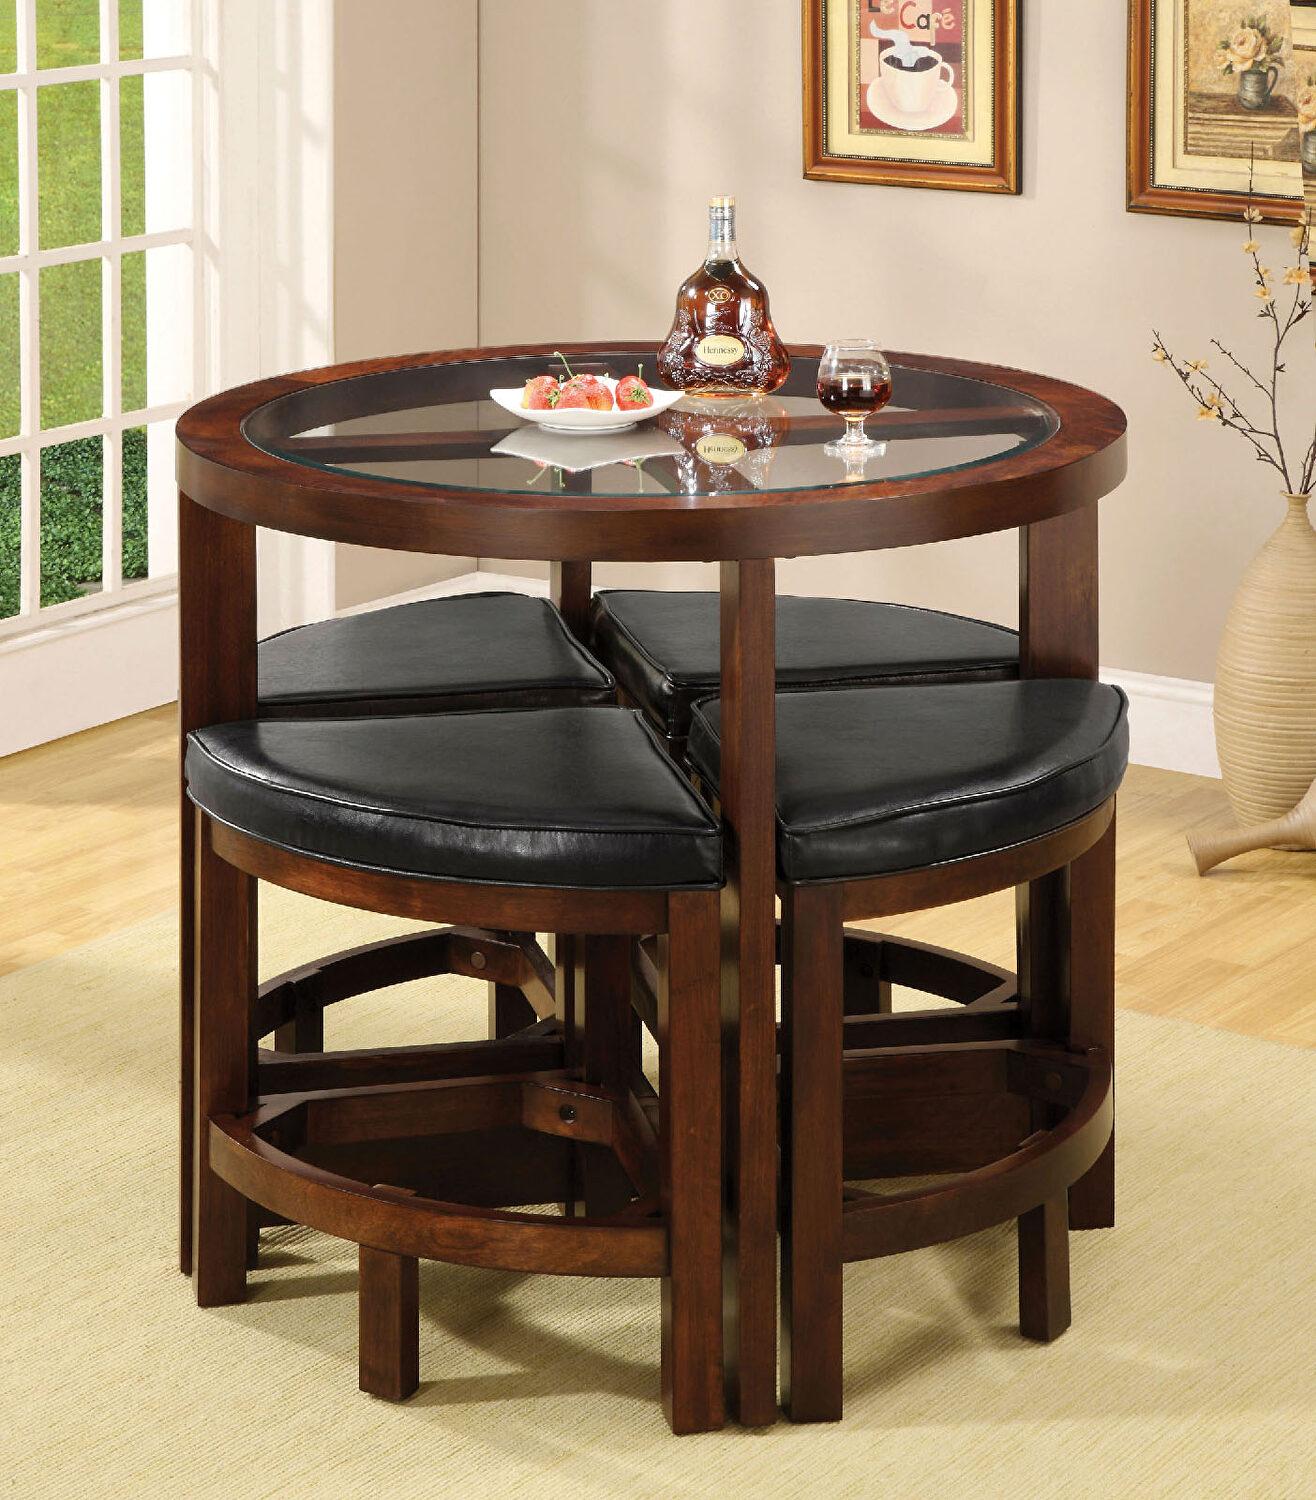 Contemporary Counter Dining Set CM3321PT-5PK Crystal Cove CM3321PT-5PK in Dark Walnut Leatherette